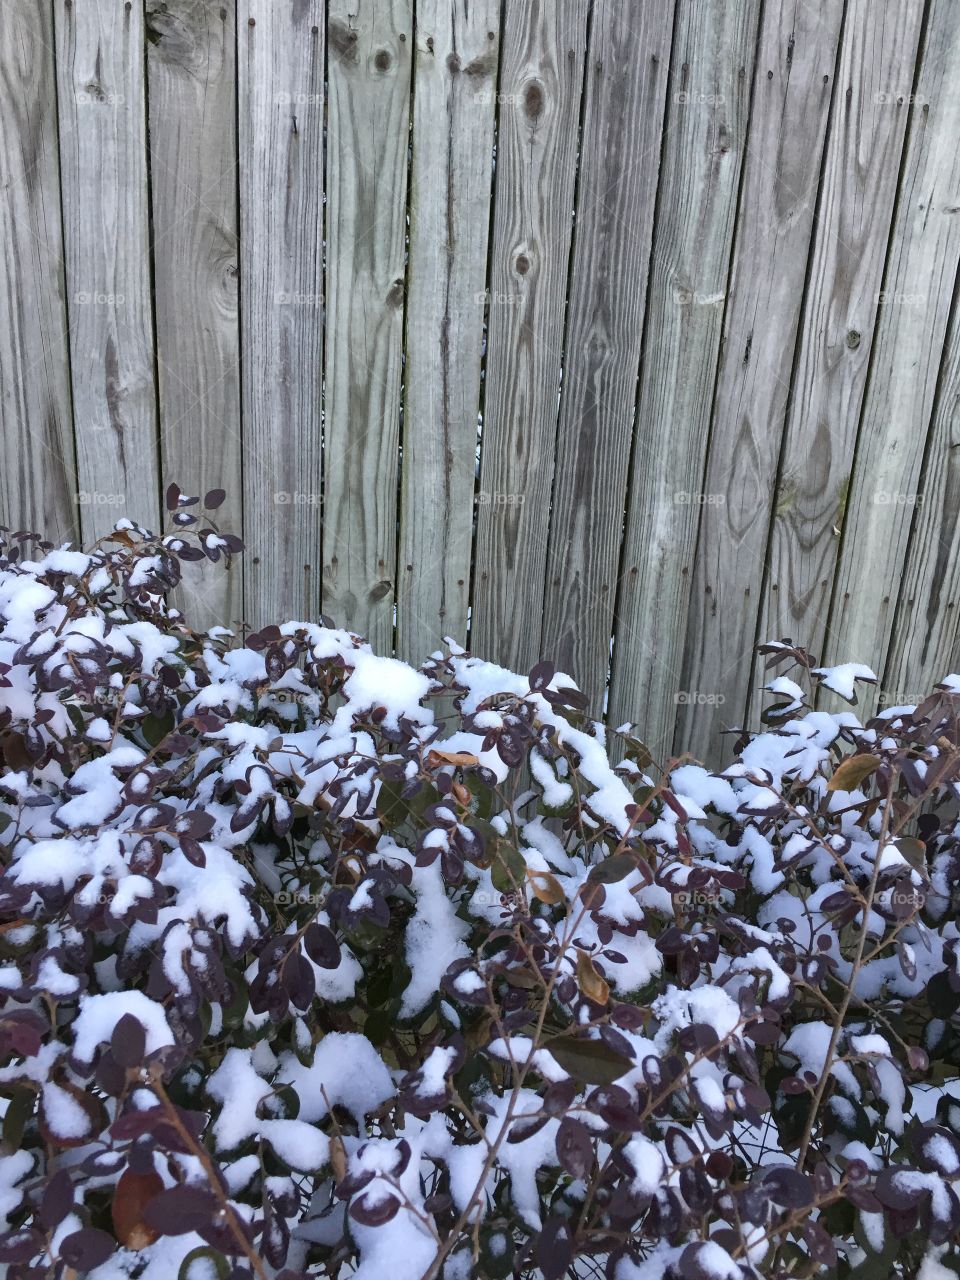 Snow on bushes by the fence.